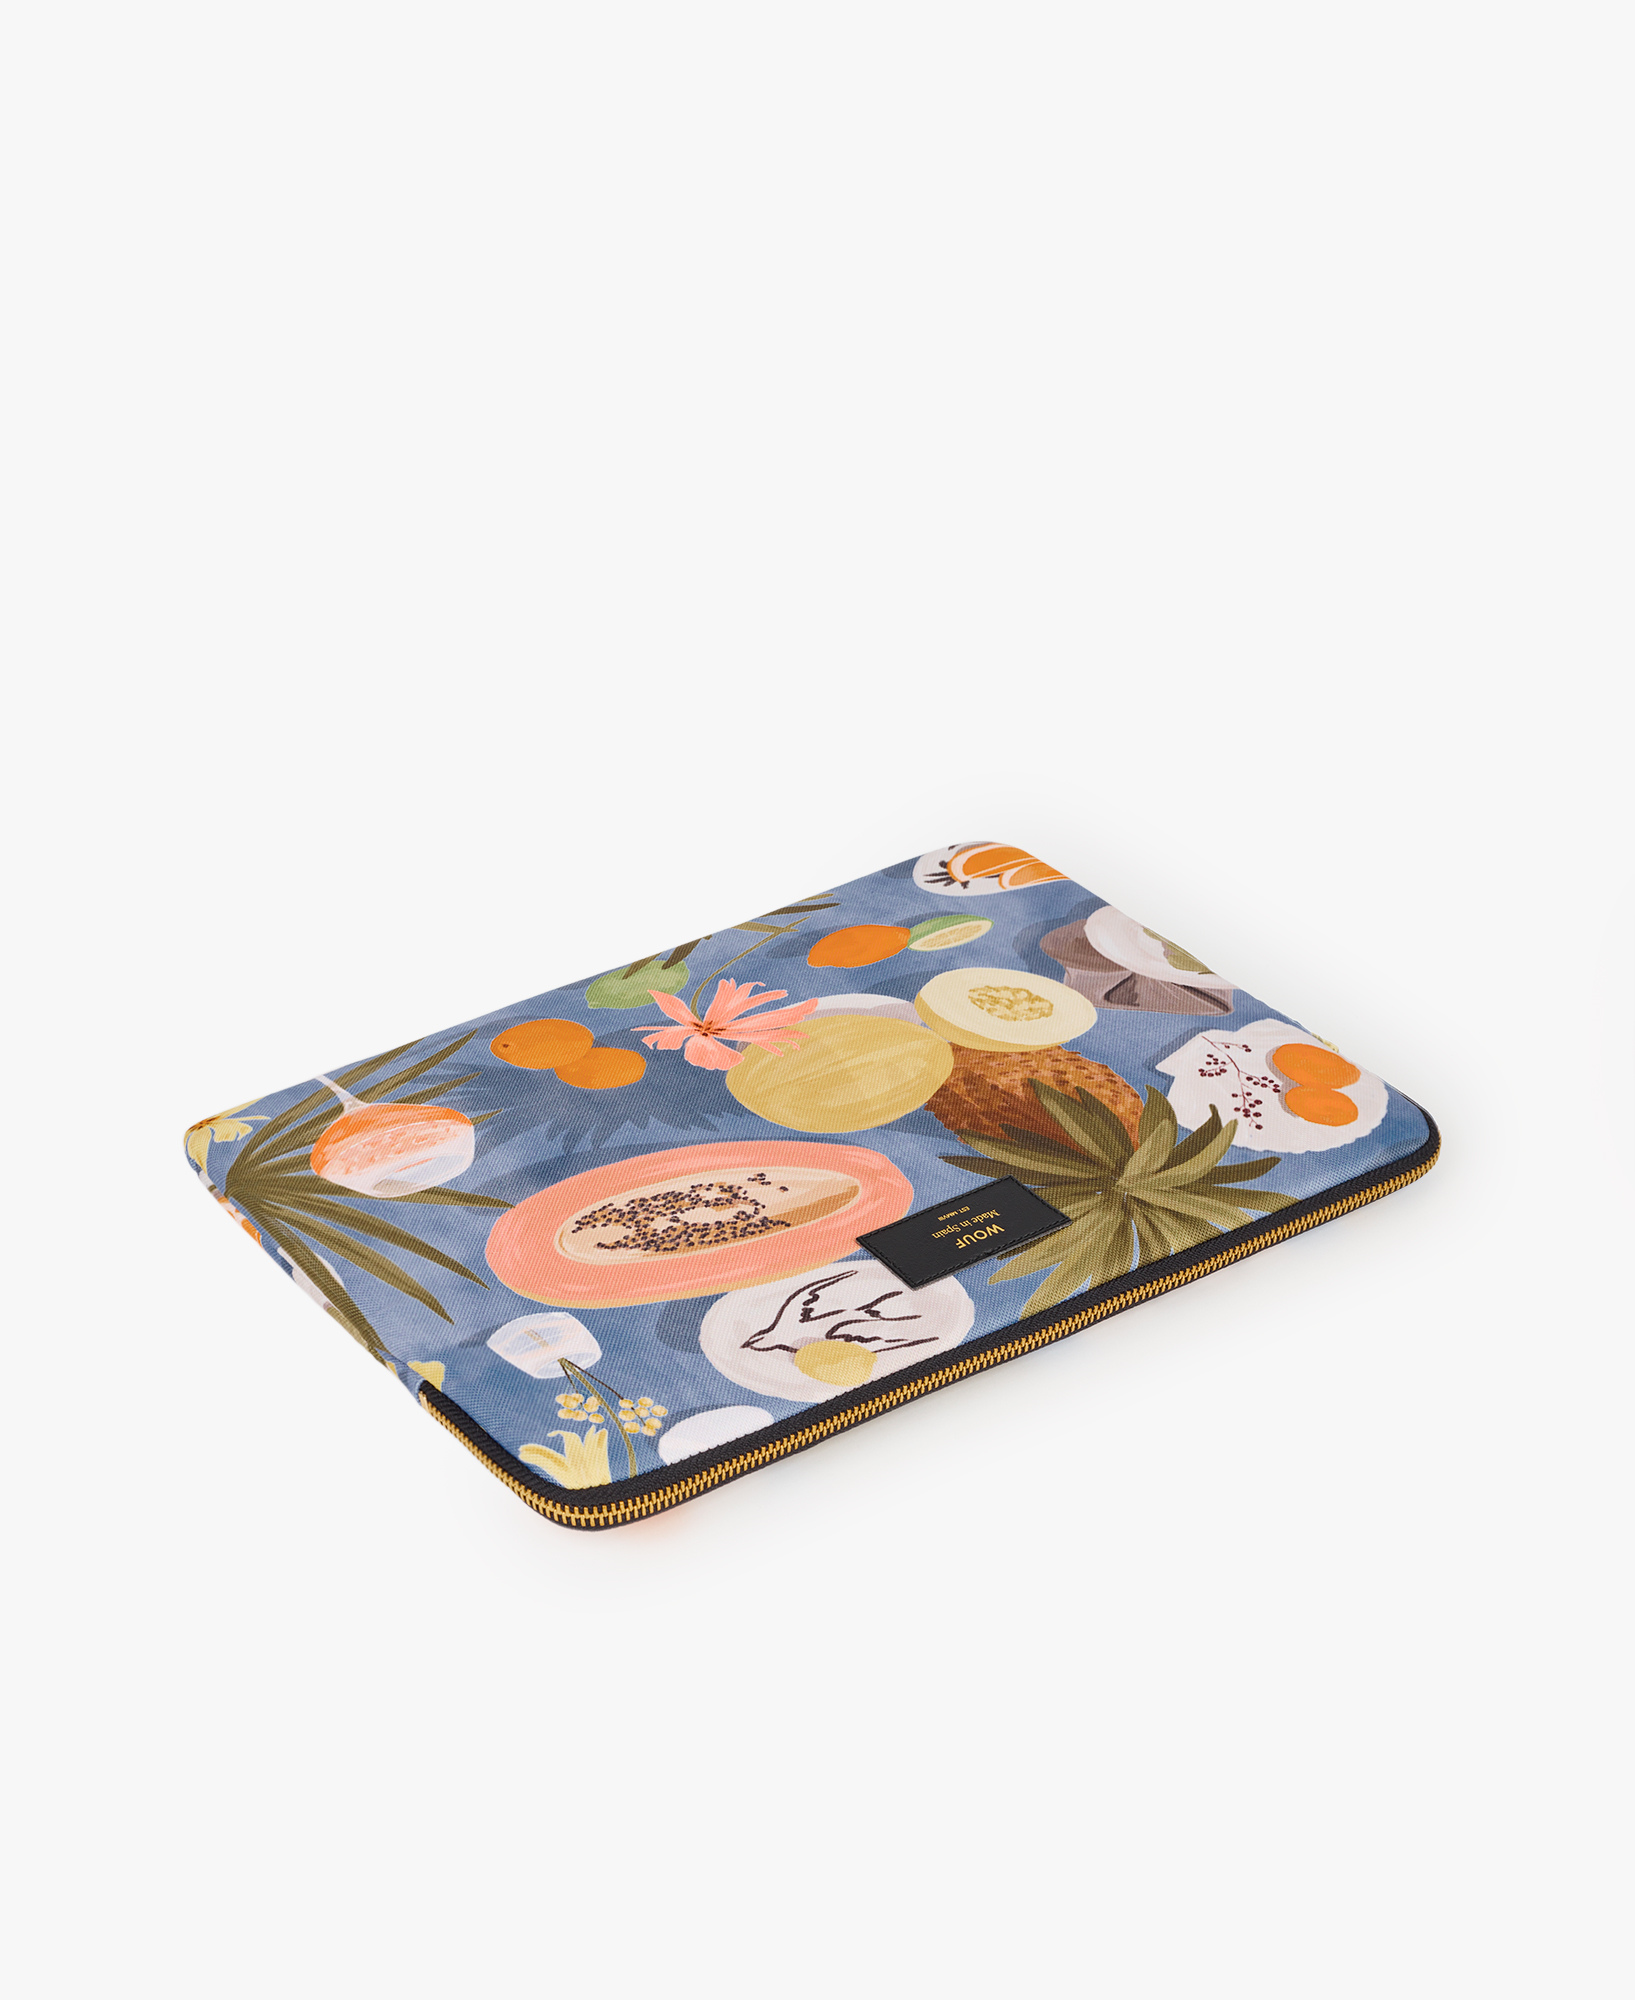 WOUF-13-Laptop-Sleeve-Cadaques-Display